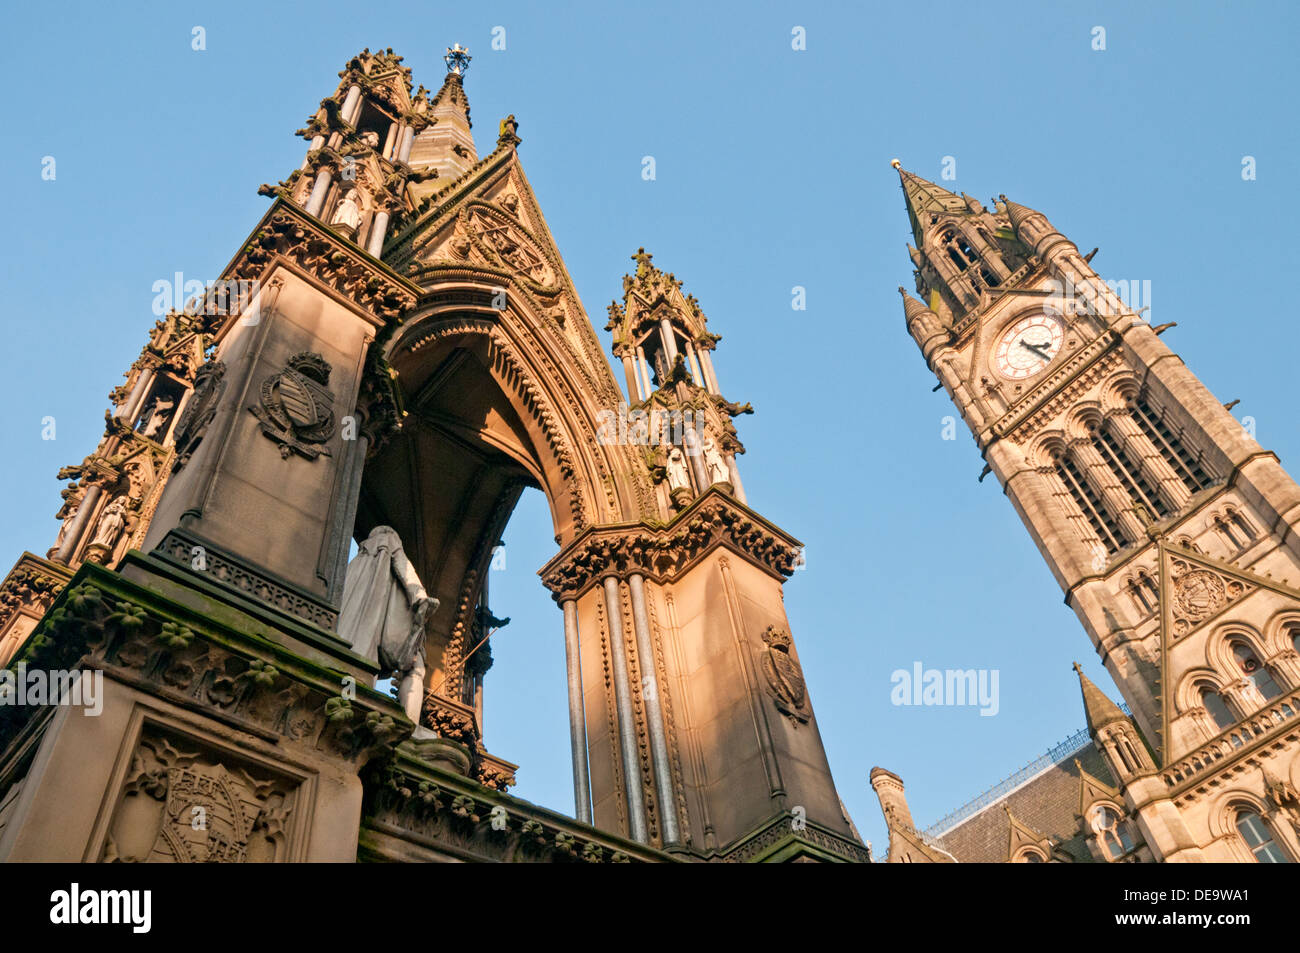 Clock Tower on Manchester Town Hall and The Albert Memorial, Albert Square, Manchester, England, UK Stock Photo